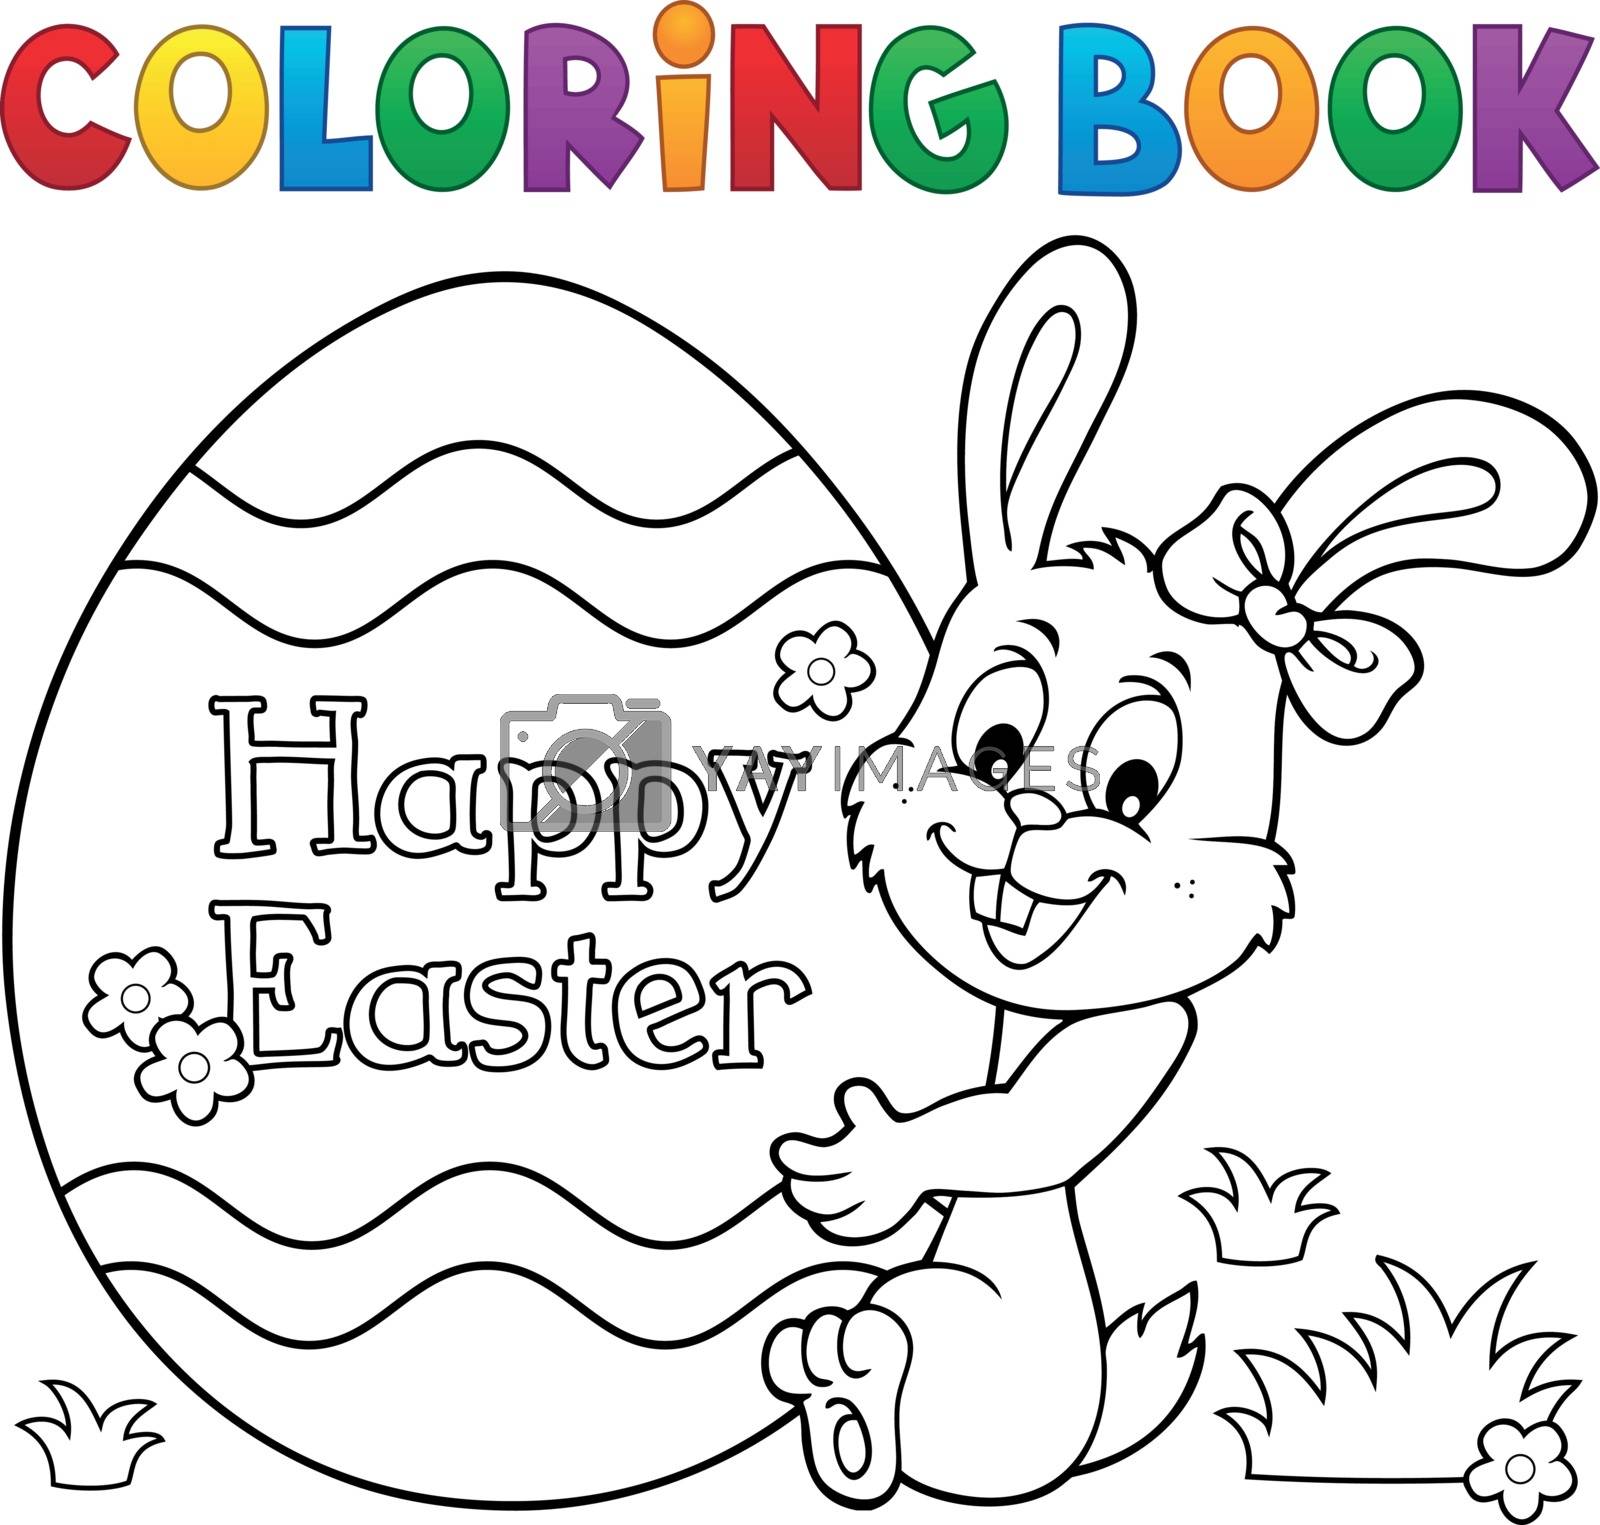 Royalty free image of Coloring book Easter egg and bunny 1 by clairev